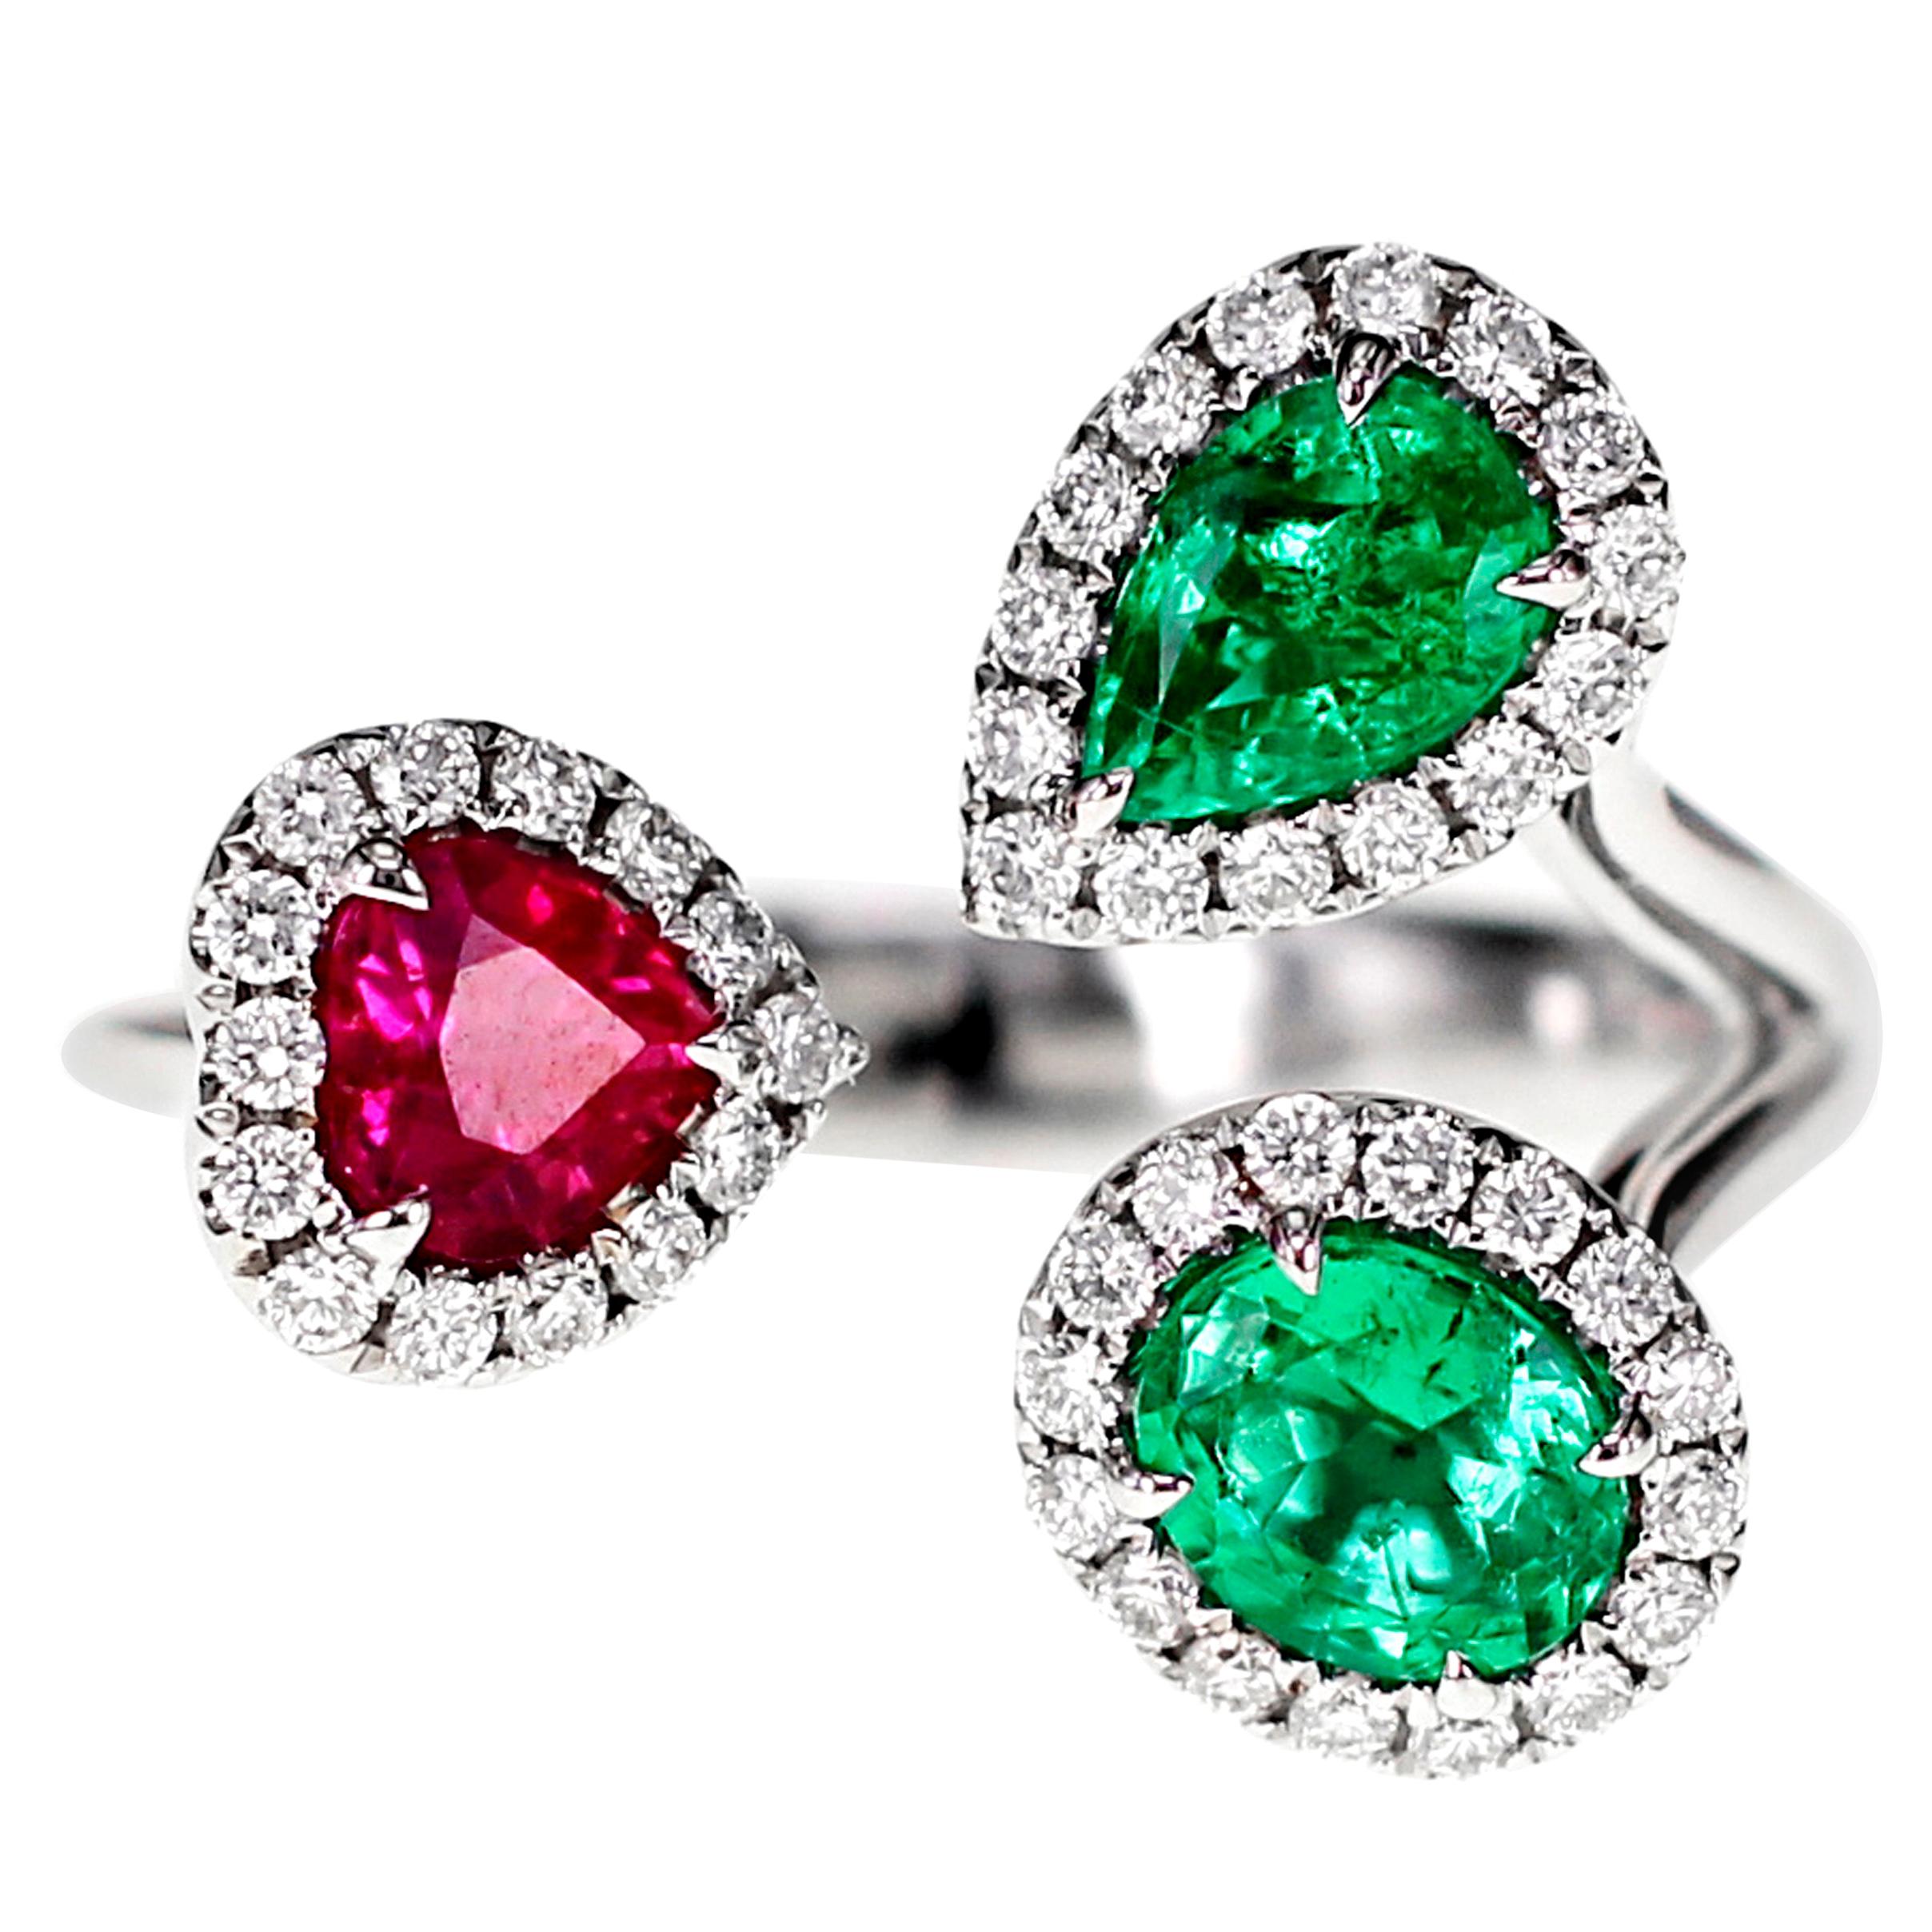 Emerald and Ruby Petite Ring